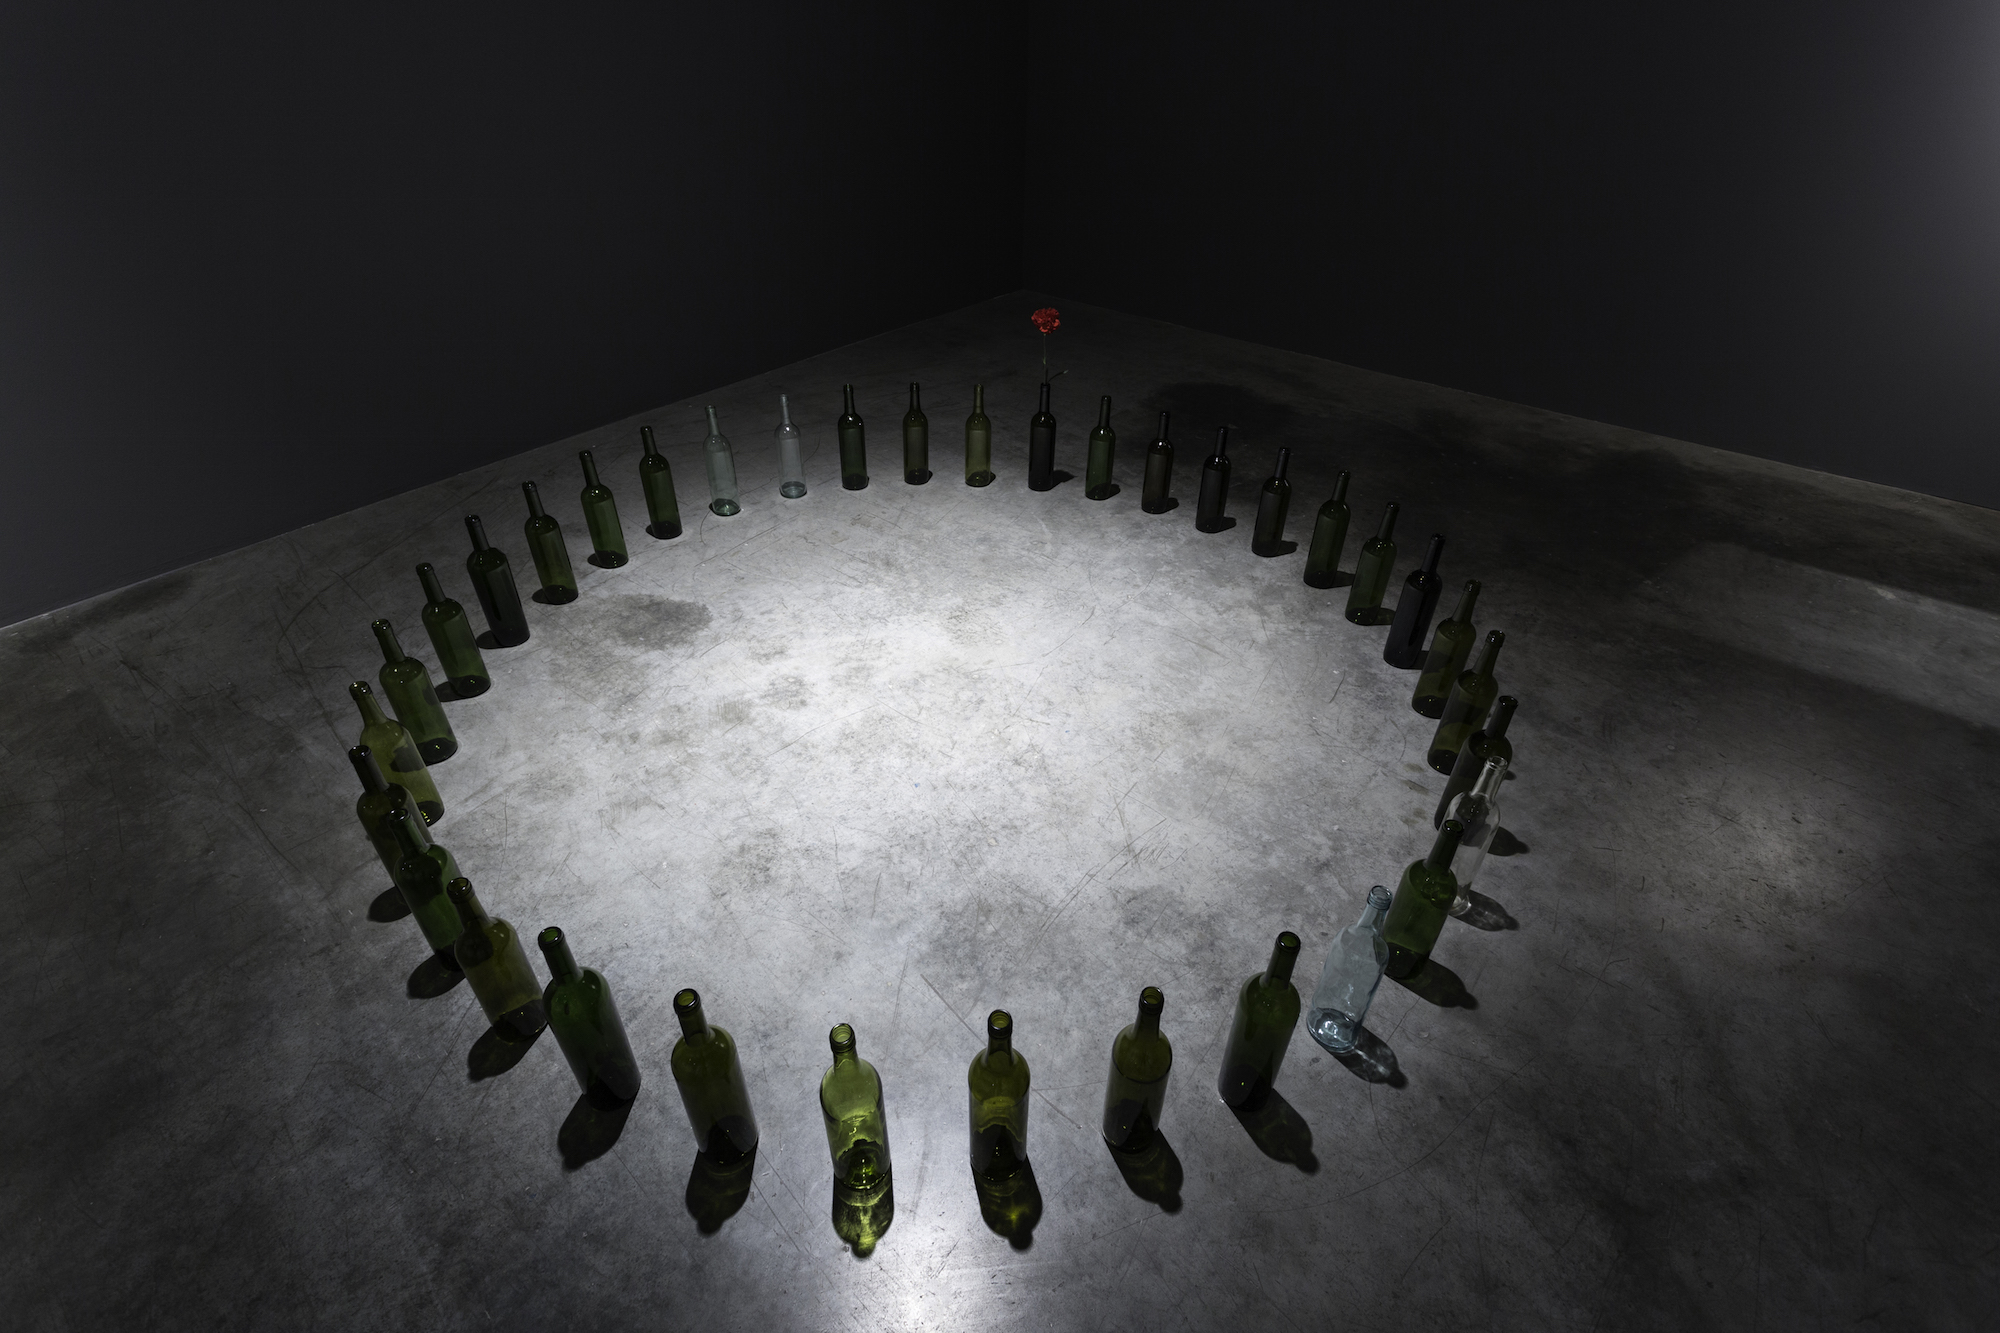  Marco Godinho  Every Day a Revolution  2012 Wine bottles, red carnation flowers Dimensions variable 